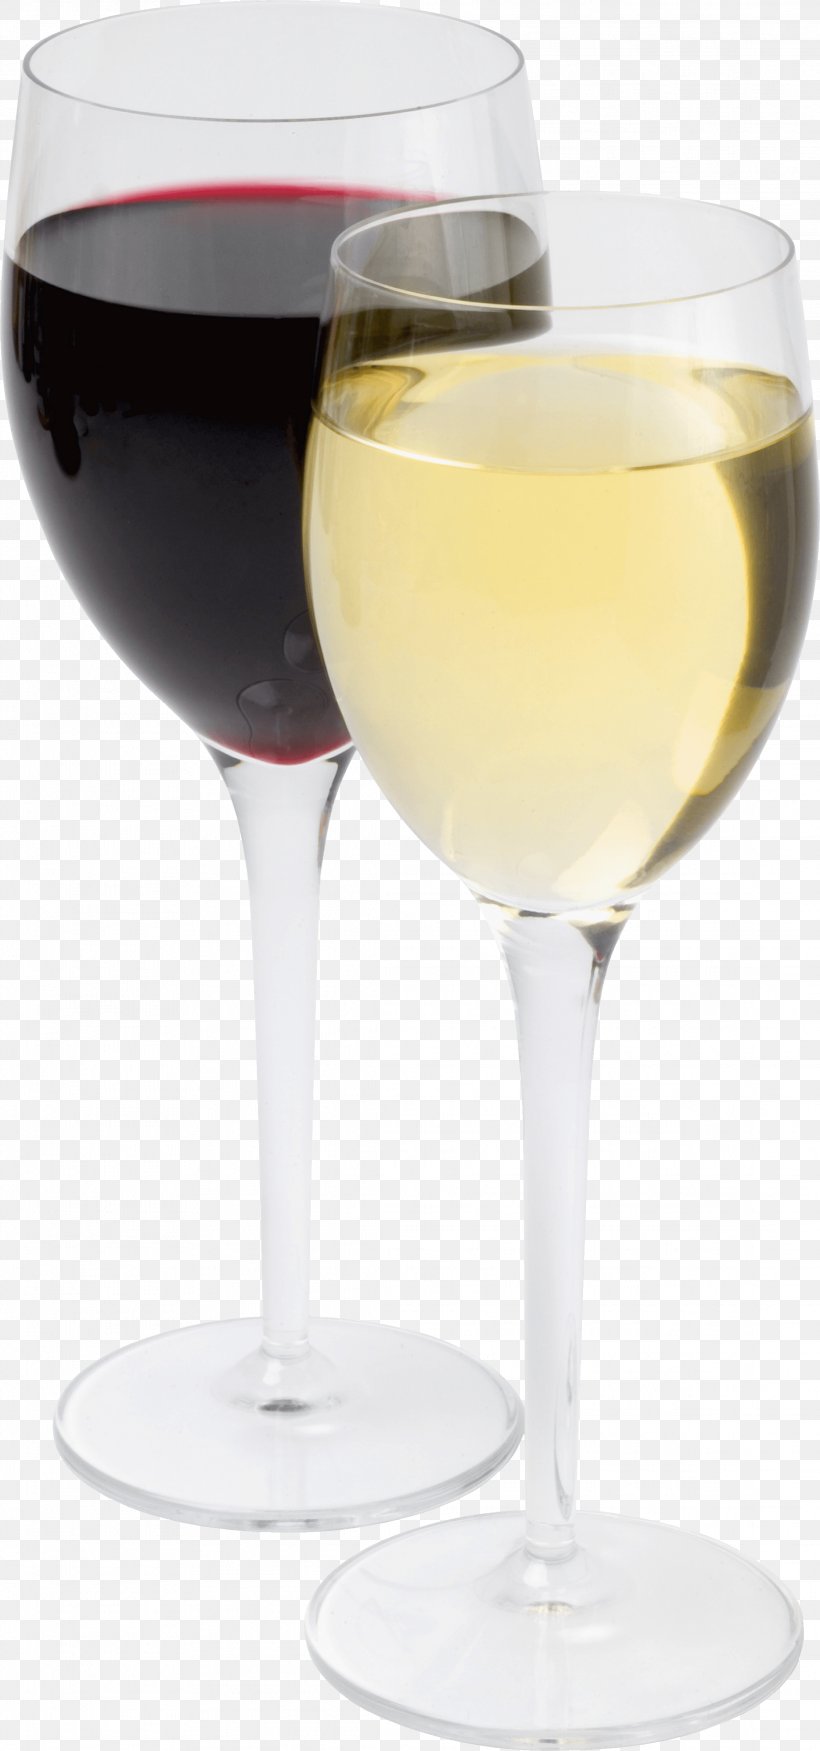 Wine Glass Champagne Drink Cup, PNG, 2232x4767px, White Wine, Alcoholic Beverage, Alcoholic Drink, Beer Glass, Champagne Glass Download Free